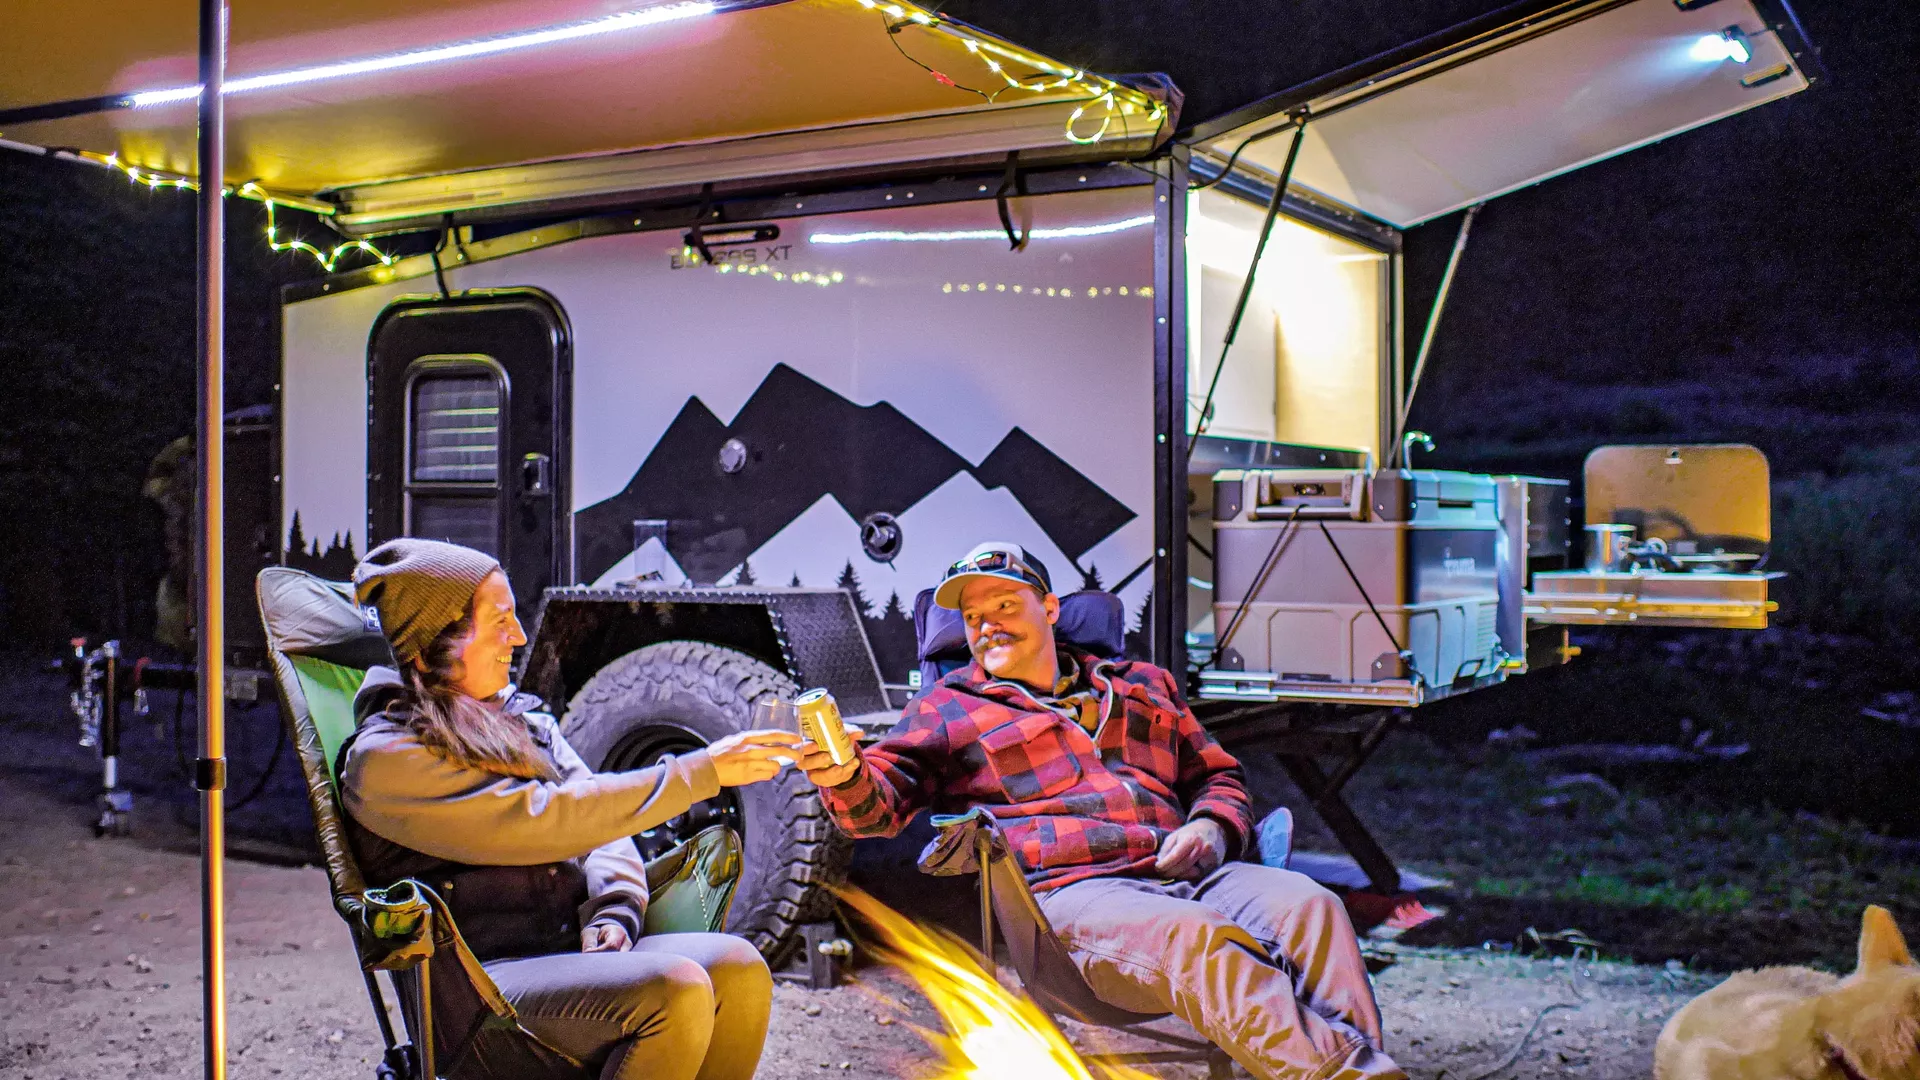 Keeping Camp Lit Up with an Offroad Camper Trailer